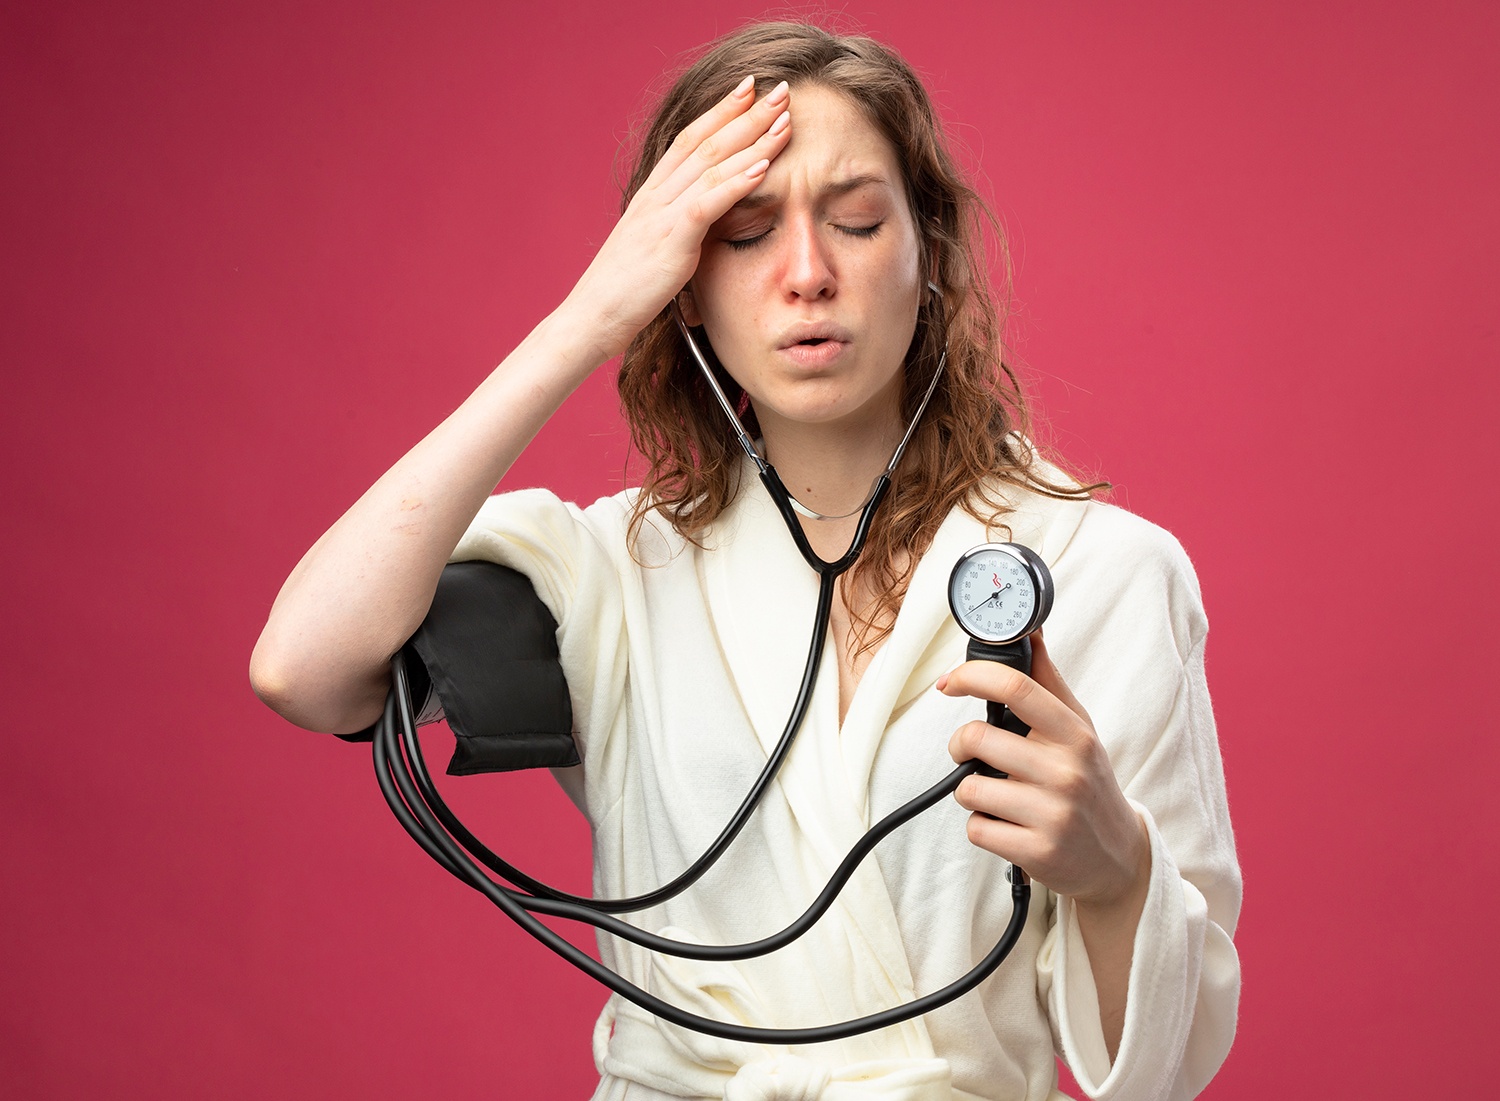 weak young ill girl with closed eyes wearing white robe measuring her own pressure with sphygmomanometer putting hand on forehead isolated on pink background